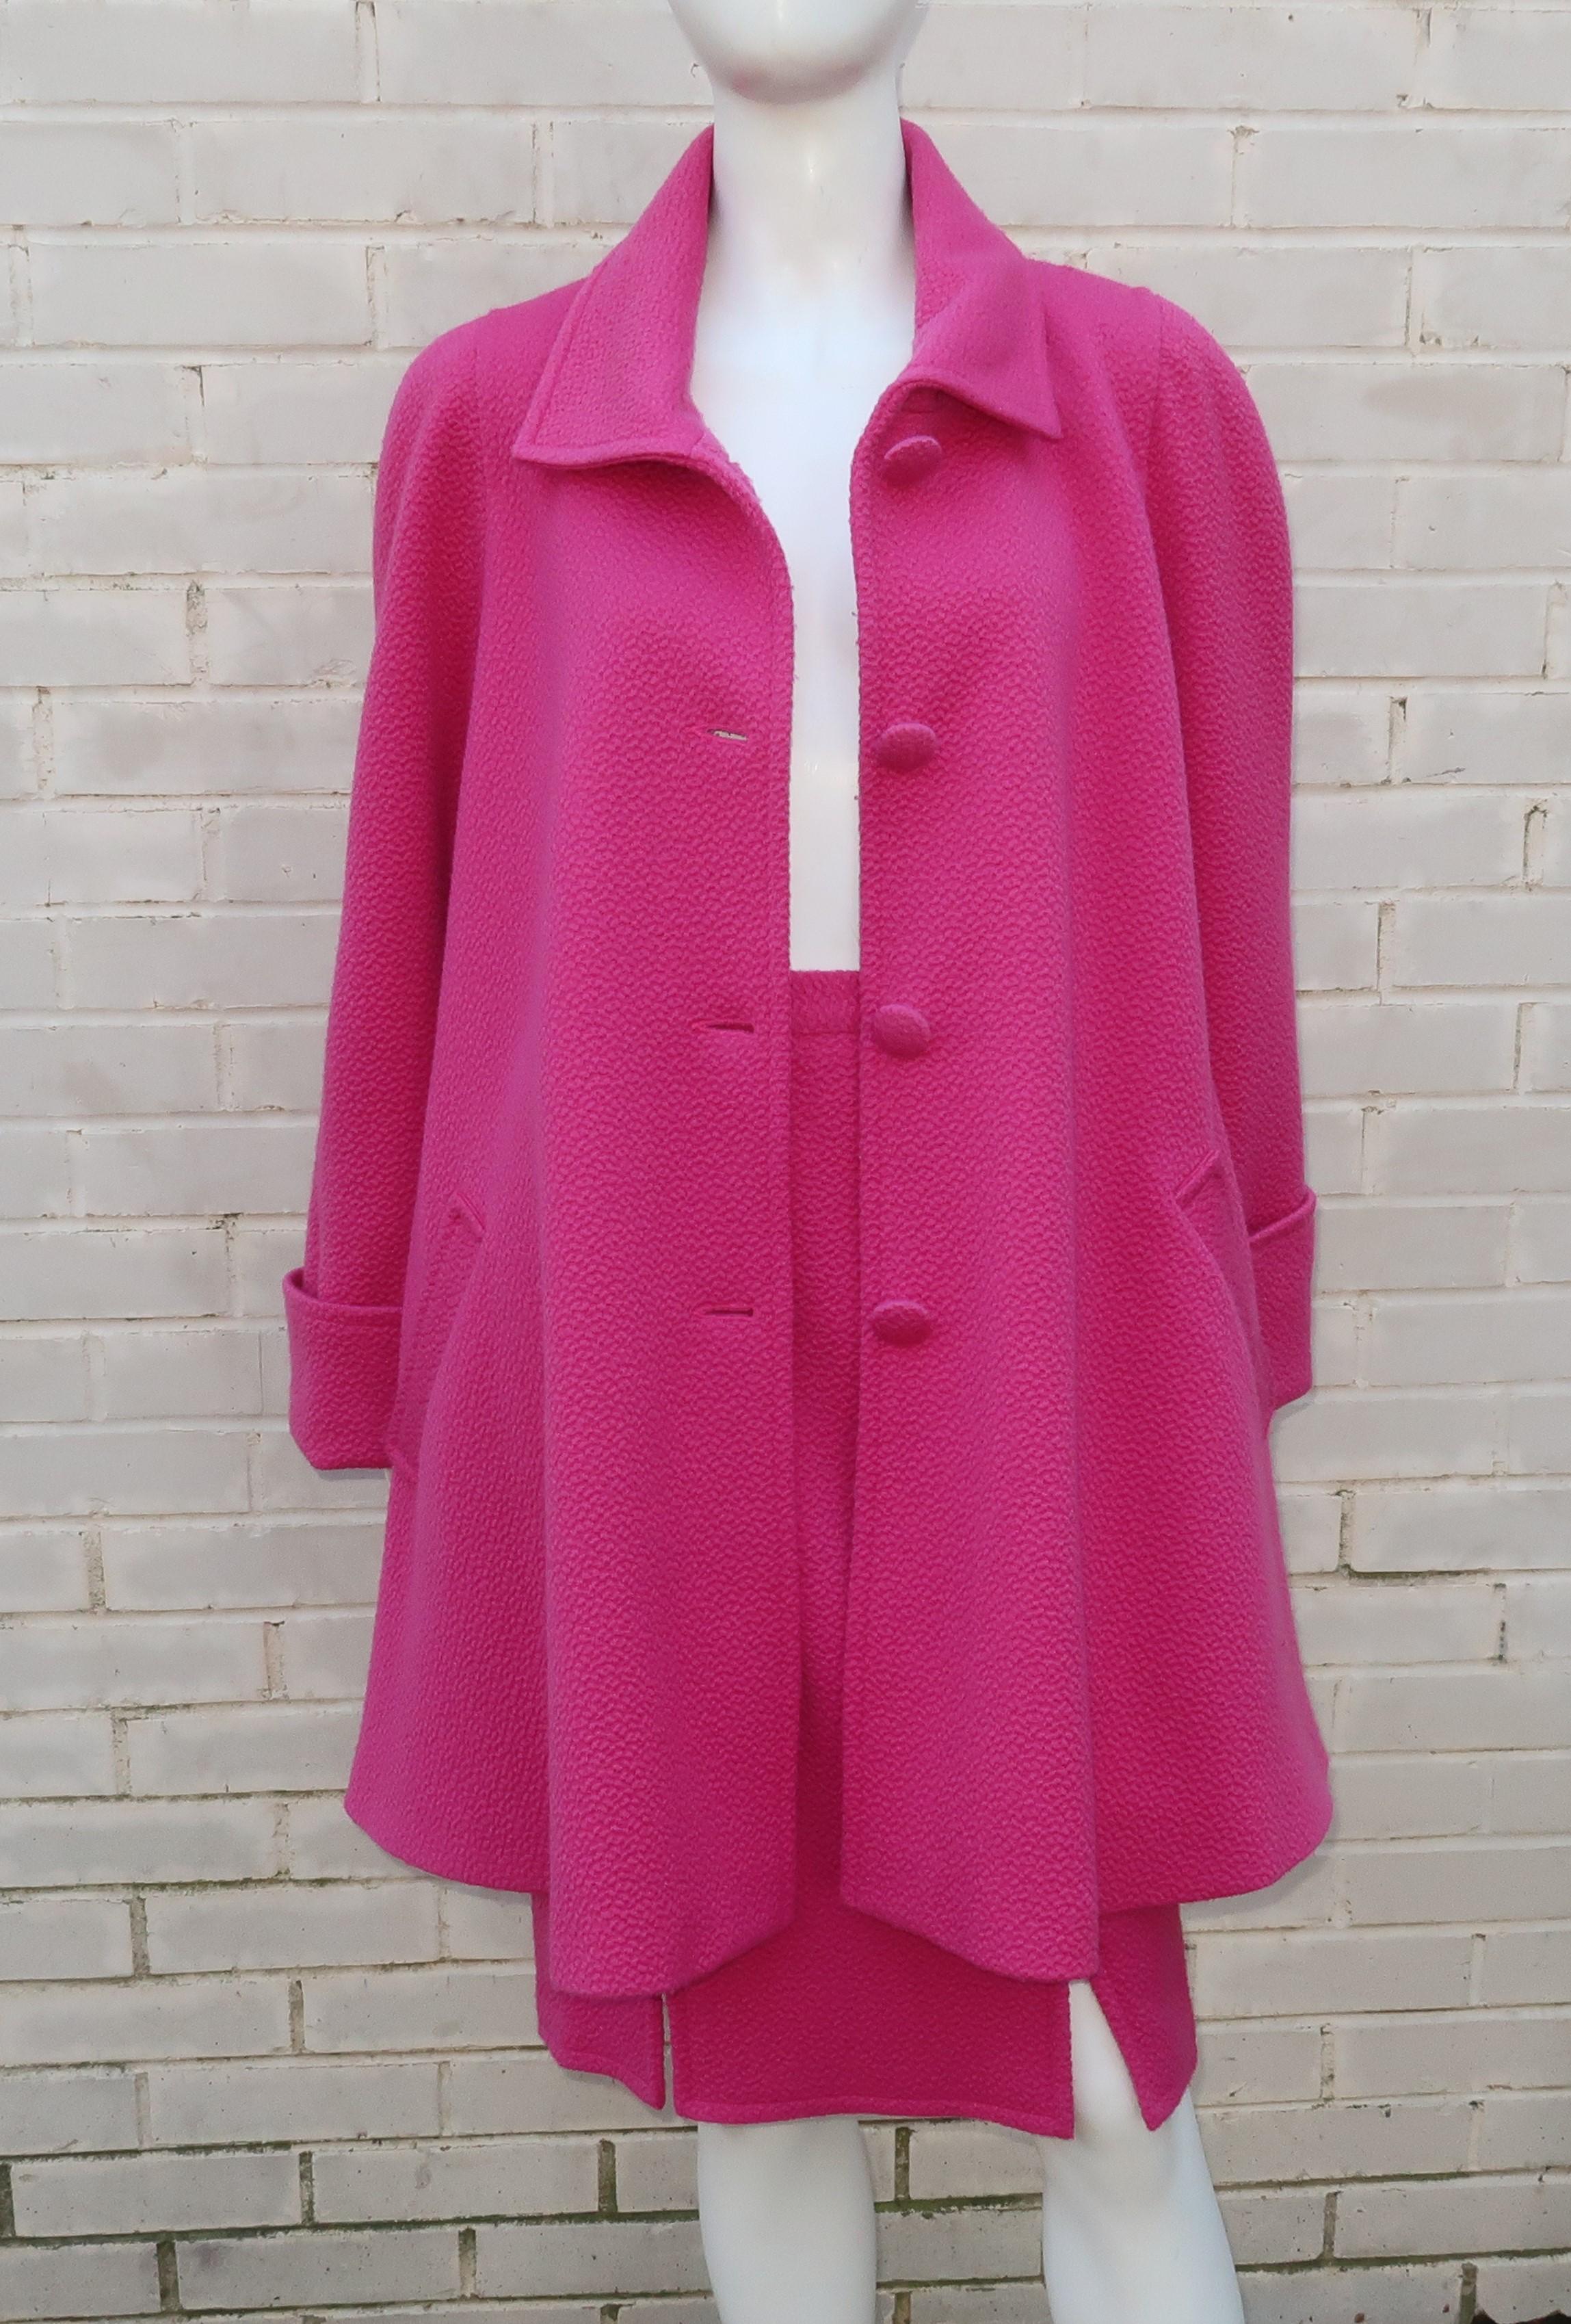 Women's Vintage Liliane Burty Hot Pink Wool French Skirt Suit With Swing Coat